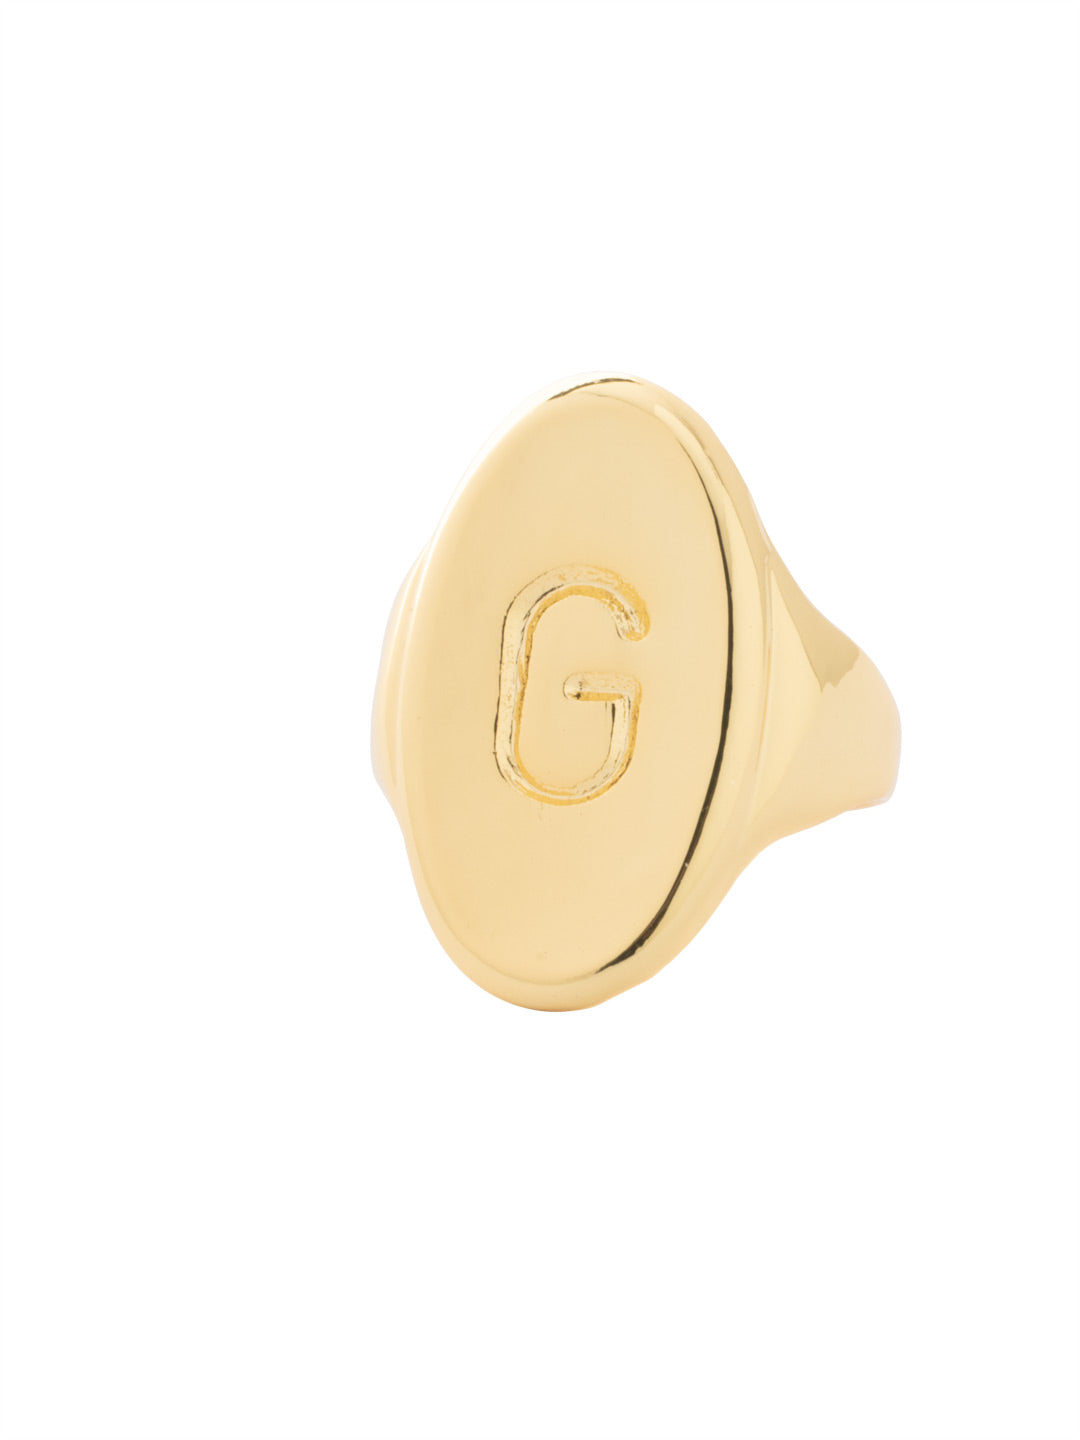 "G" Signet Statement Ring - RFK36BGMTL - <p>The Signet Statement Ring features a capital letter stamped into an oblong metal disk on an adjustable ring band. From Sorrelli's Bare Metallic collection in our Bright Gold-tone finish.</p>